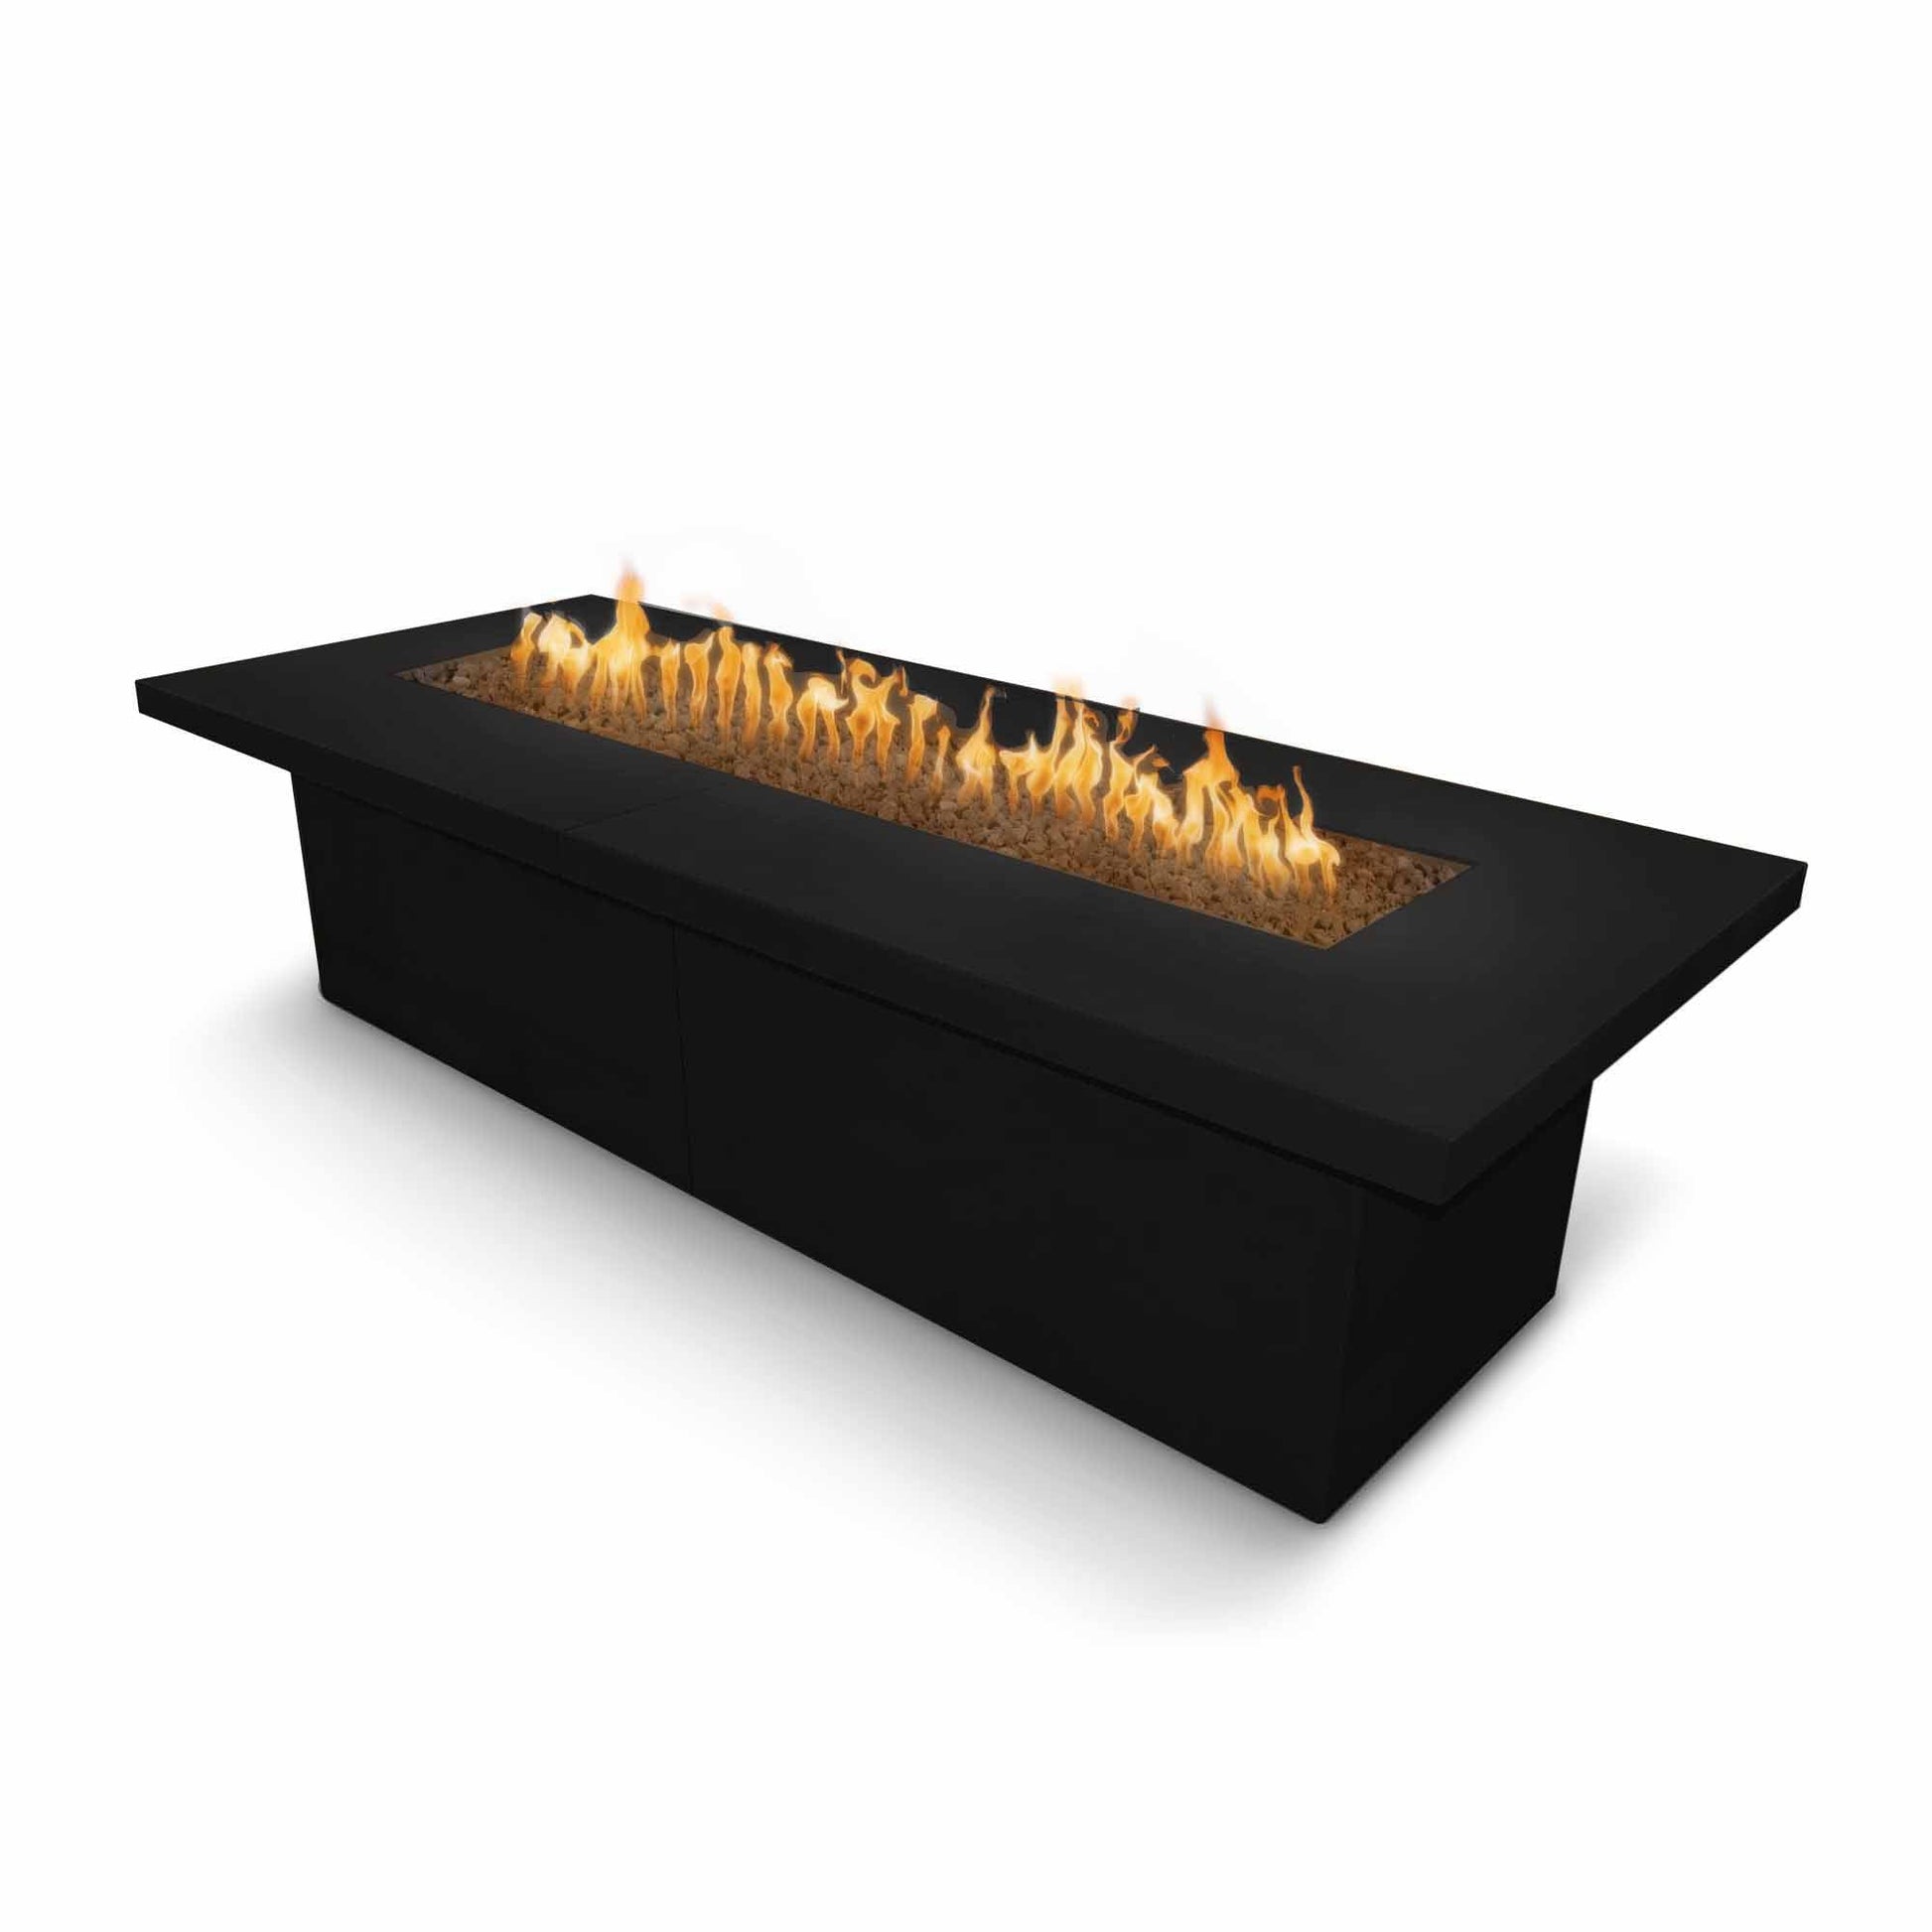 The Outdoor Plus Rectangular Newport 120" Hammered Copper Natural Gas Fire Pit with 12V Electronic Ignition